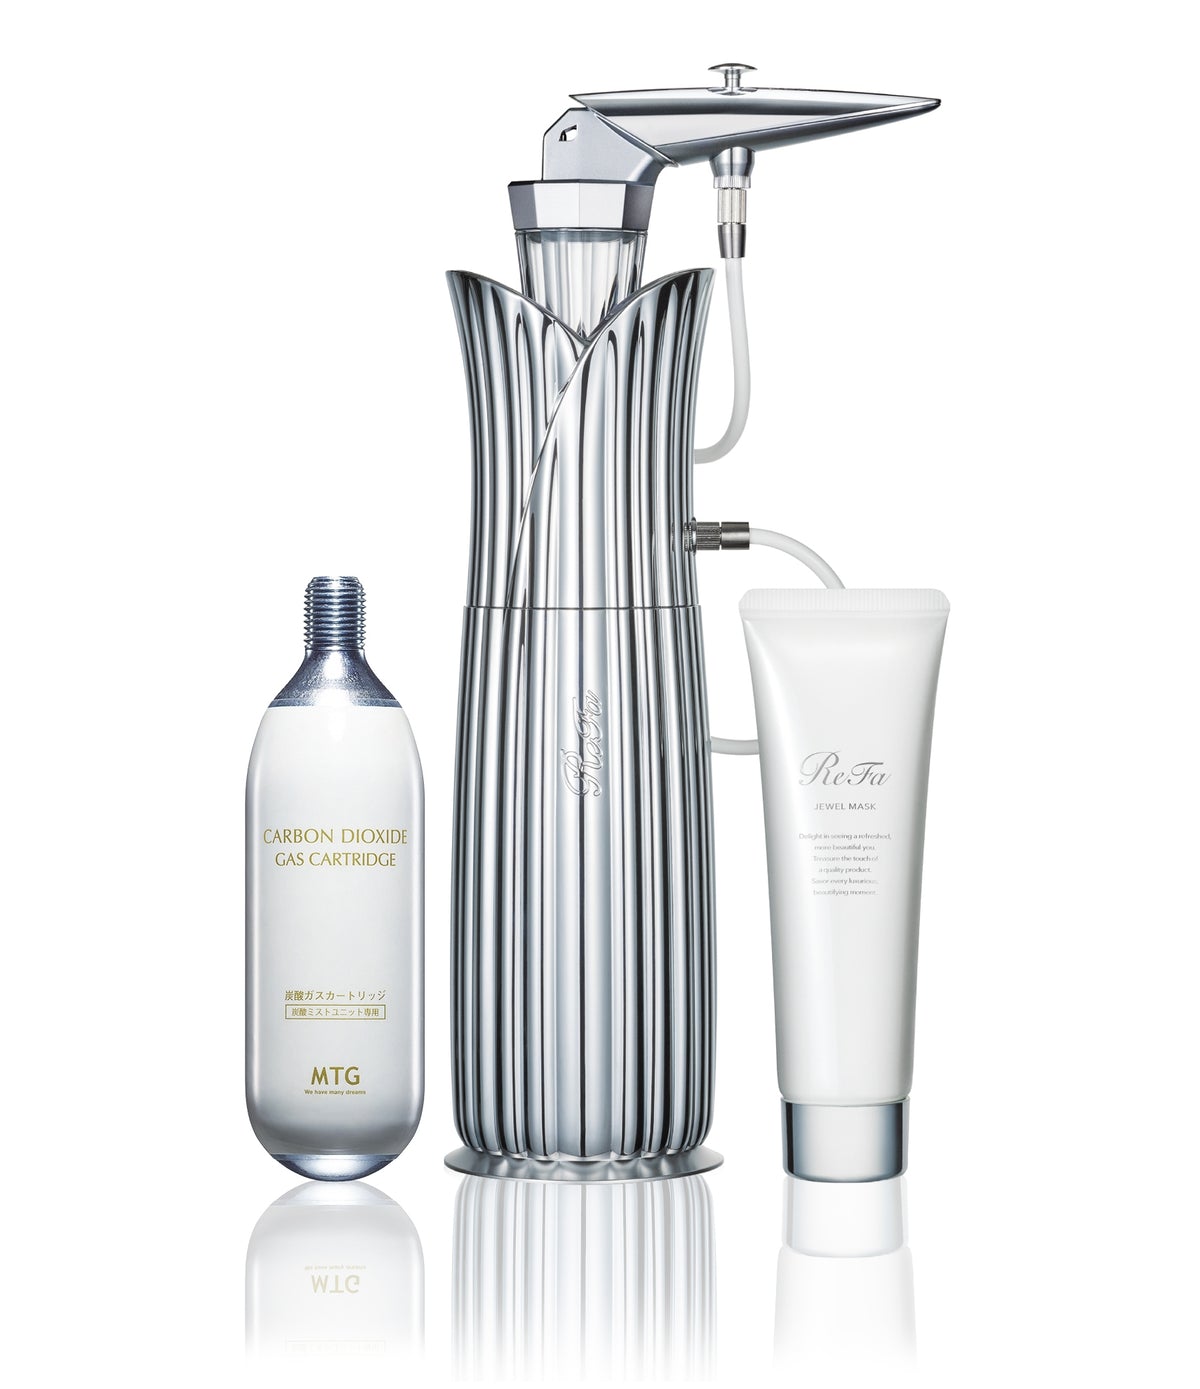 REFA Mist Set (Includes Cartridge+Mask) [IN-STORE PURCHASE ONLY]